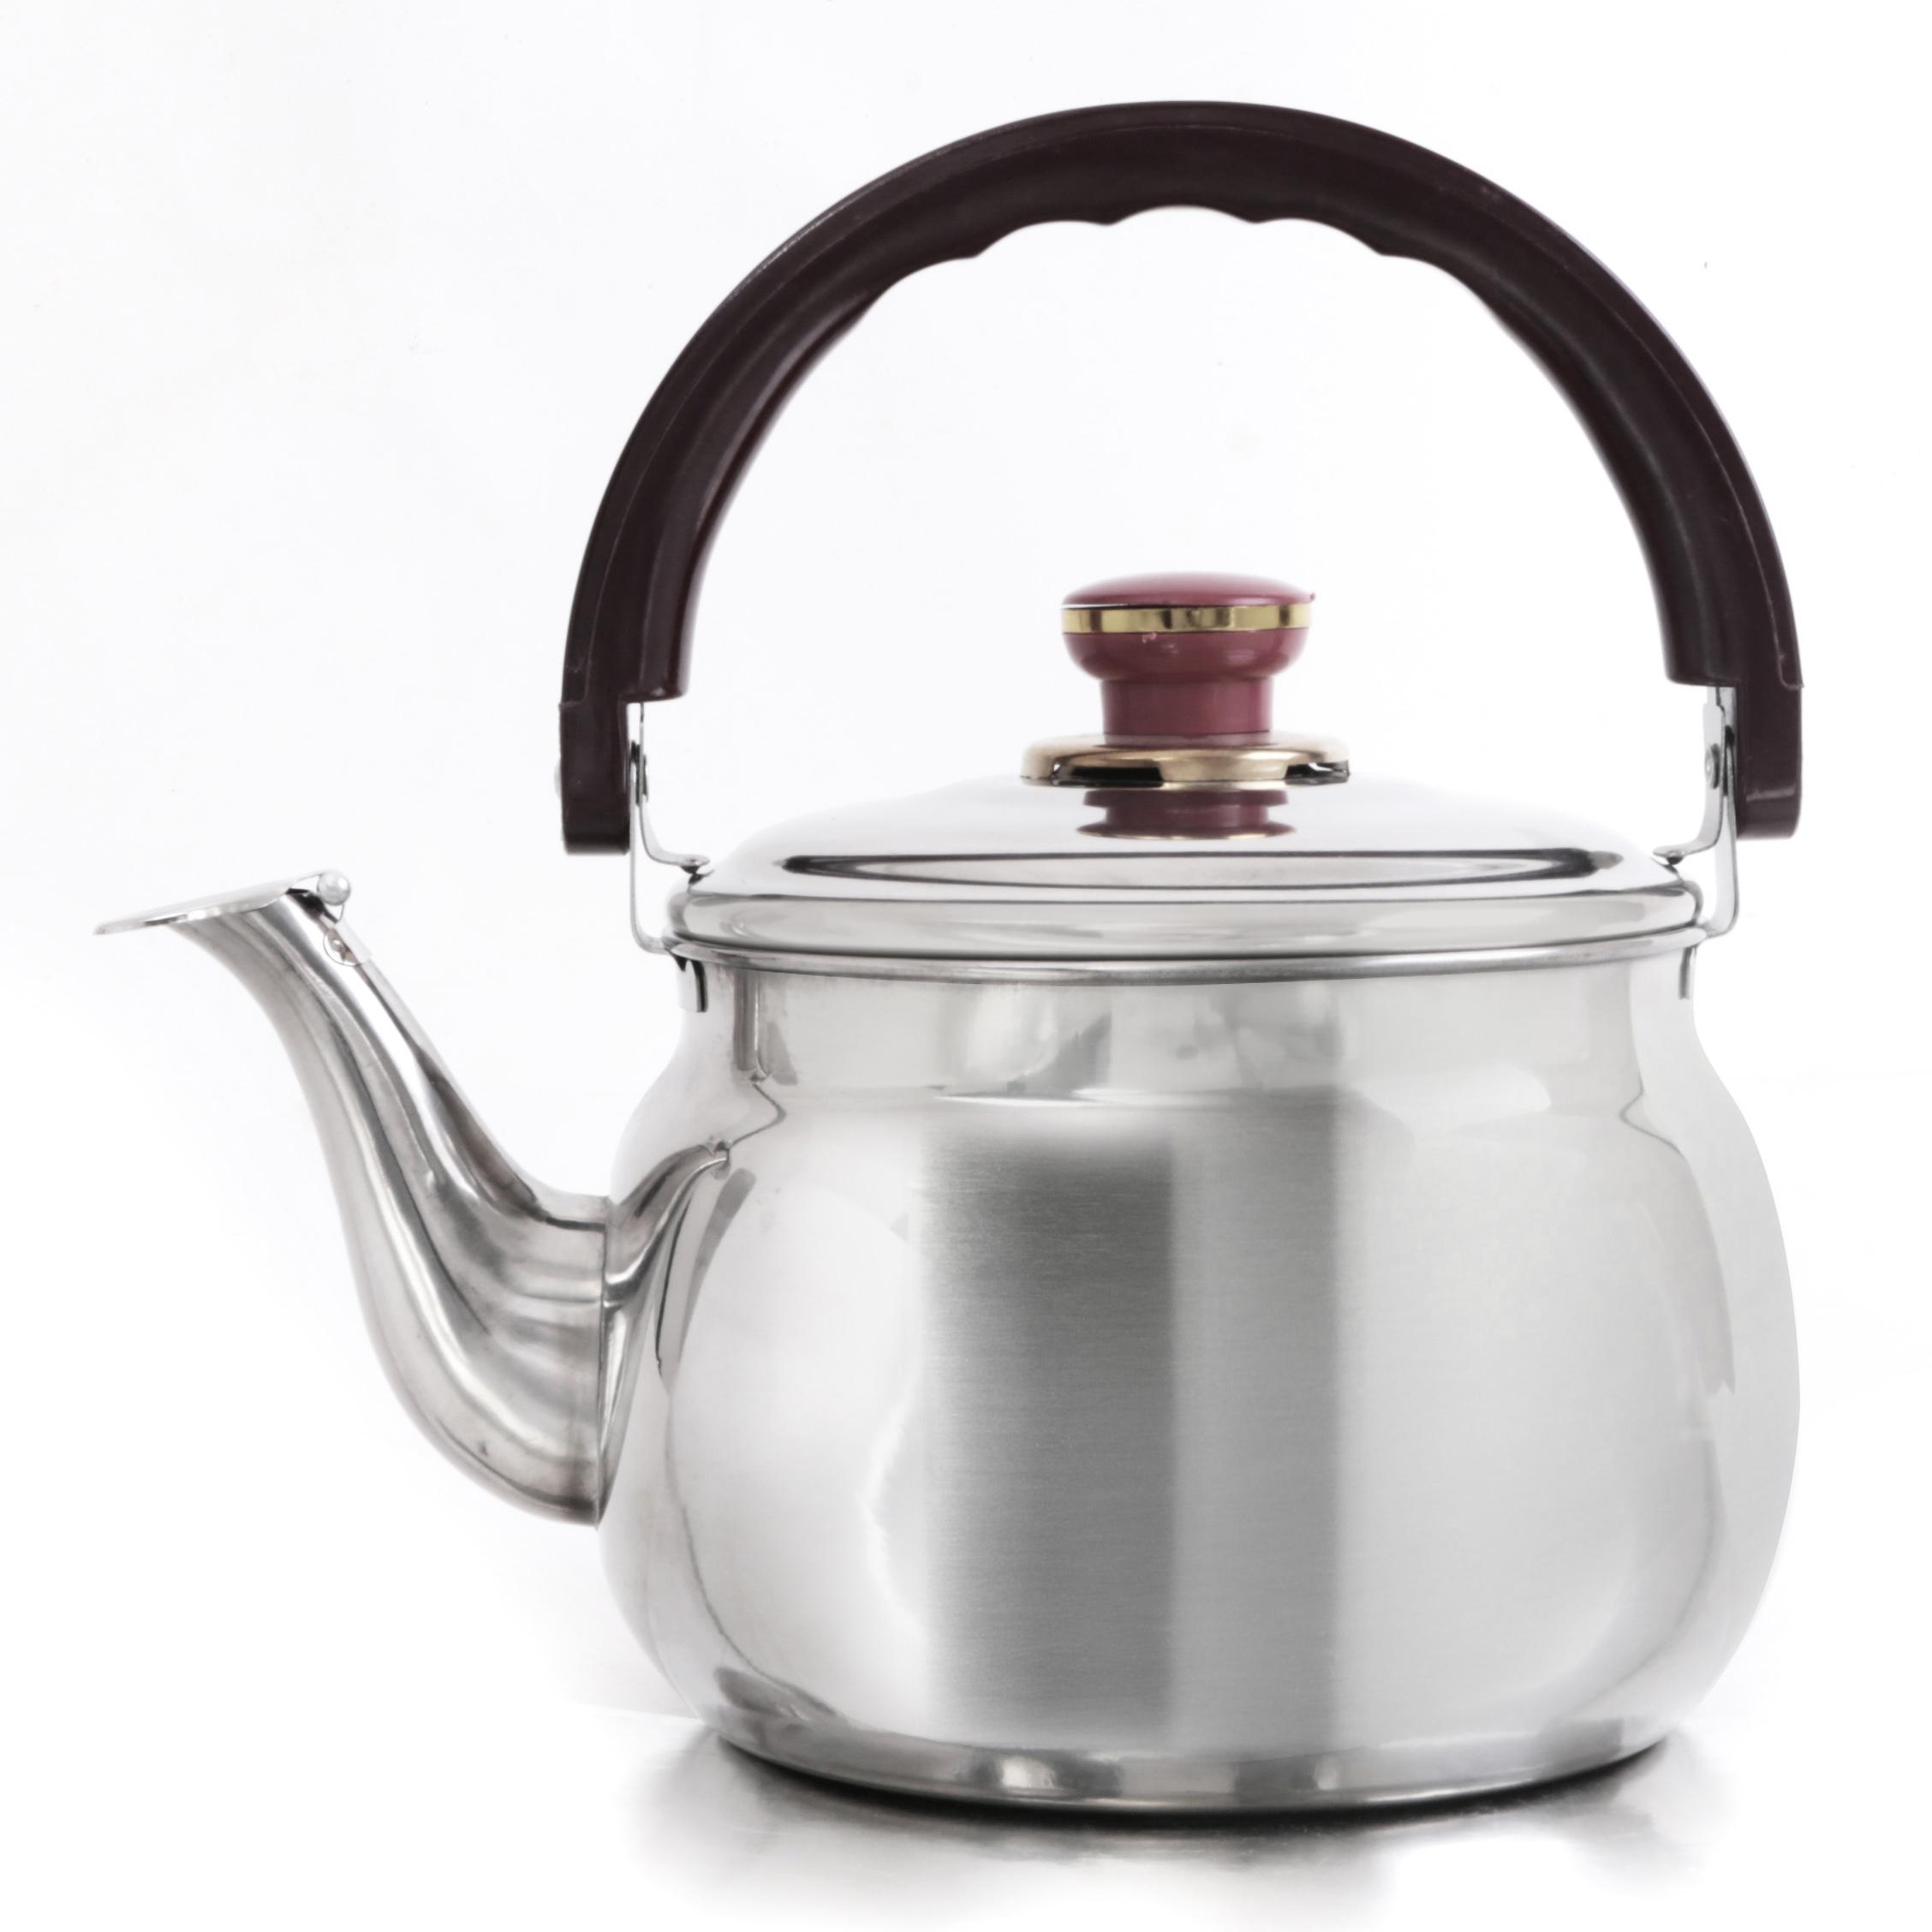 Royalford 2.7L Stainless Steel Kettle Portable Whistling Tea Kettle with Heat Resistant Handle | Ergonomic Pouring Spout | Compatible with Gas, Induction, Hot Plate, Halogen, & Ceramic Tops